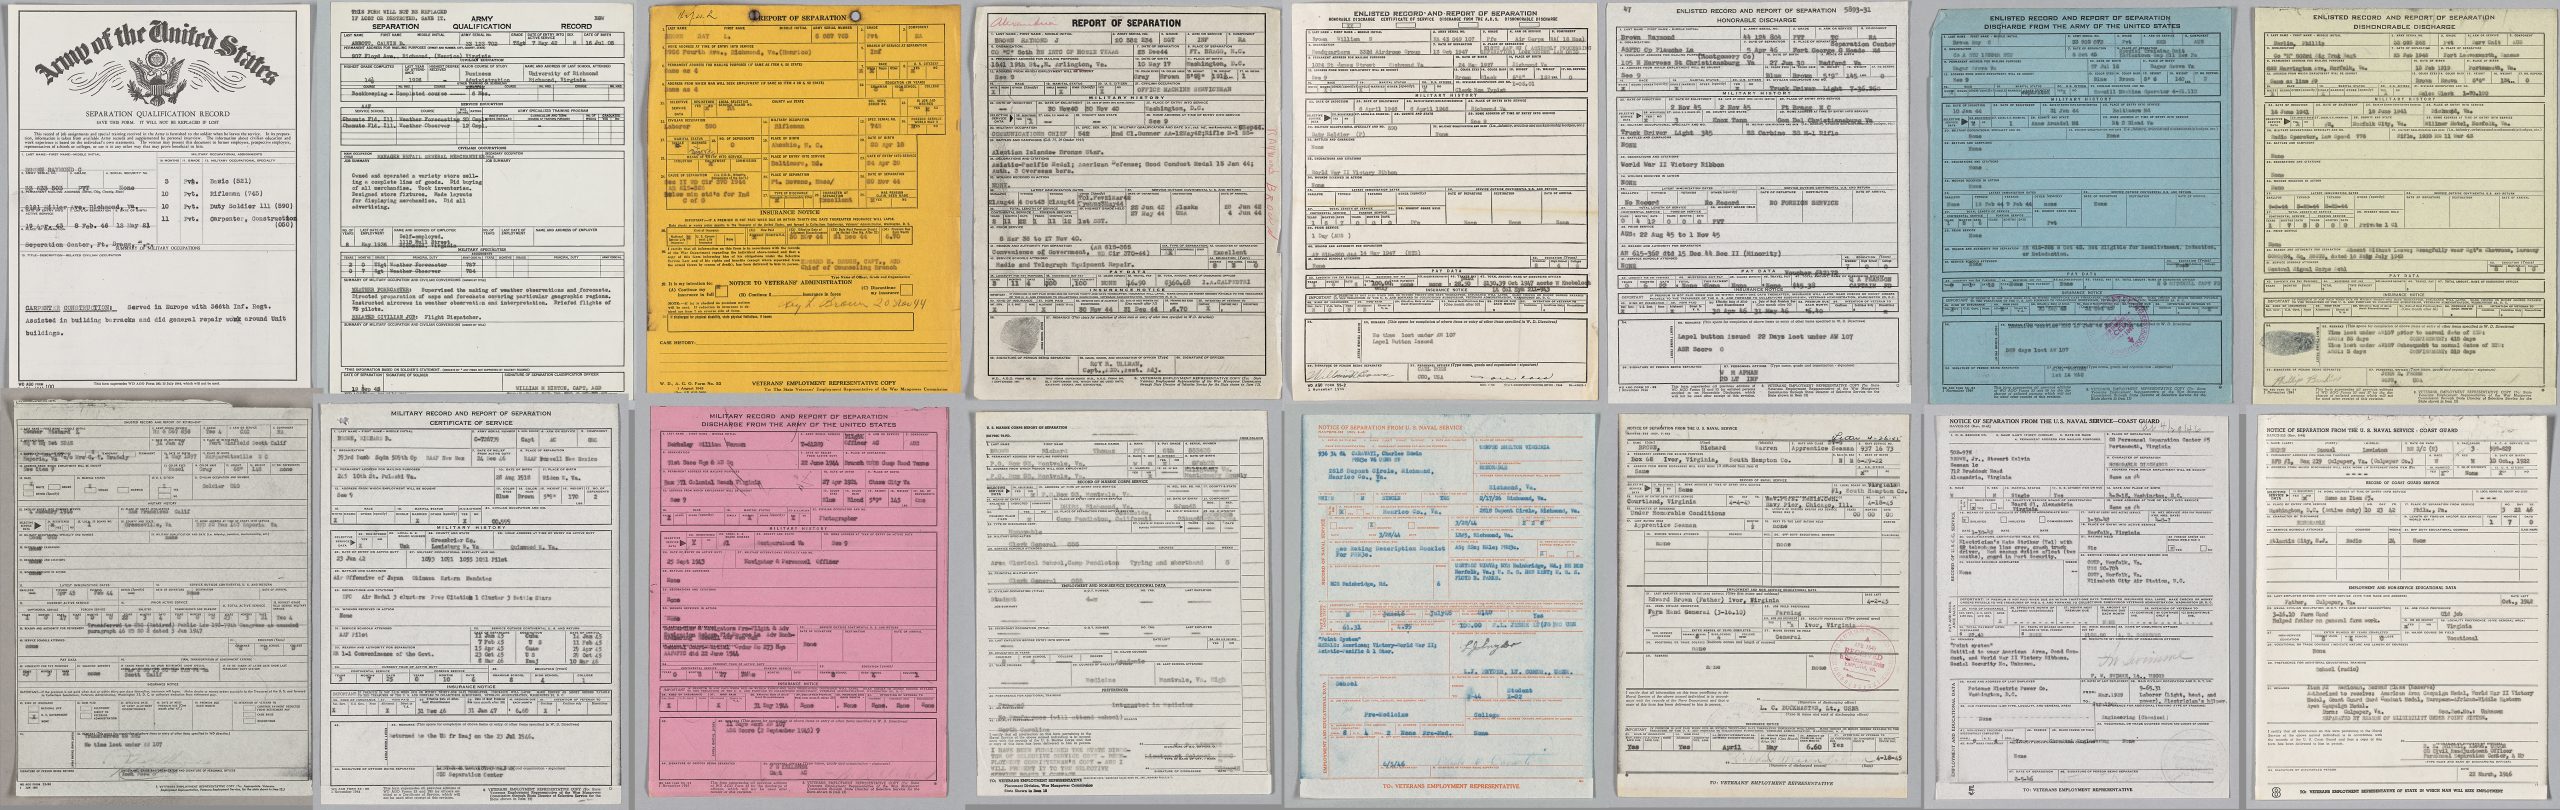 World War II Separation Notices: Marines Collection and Future